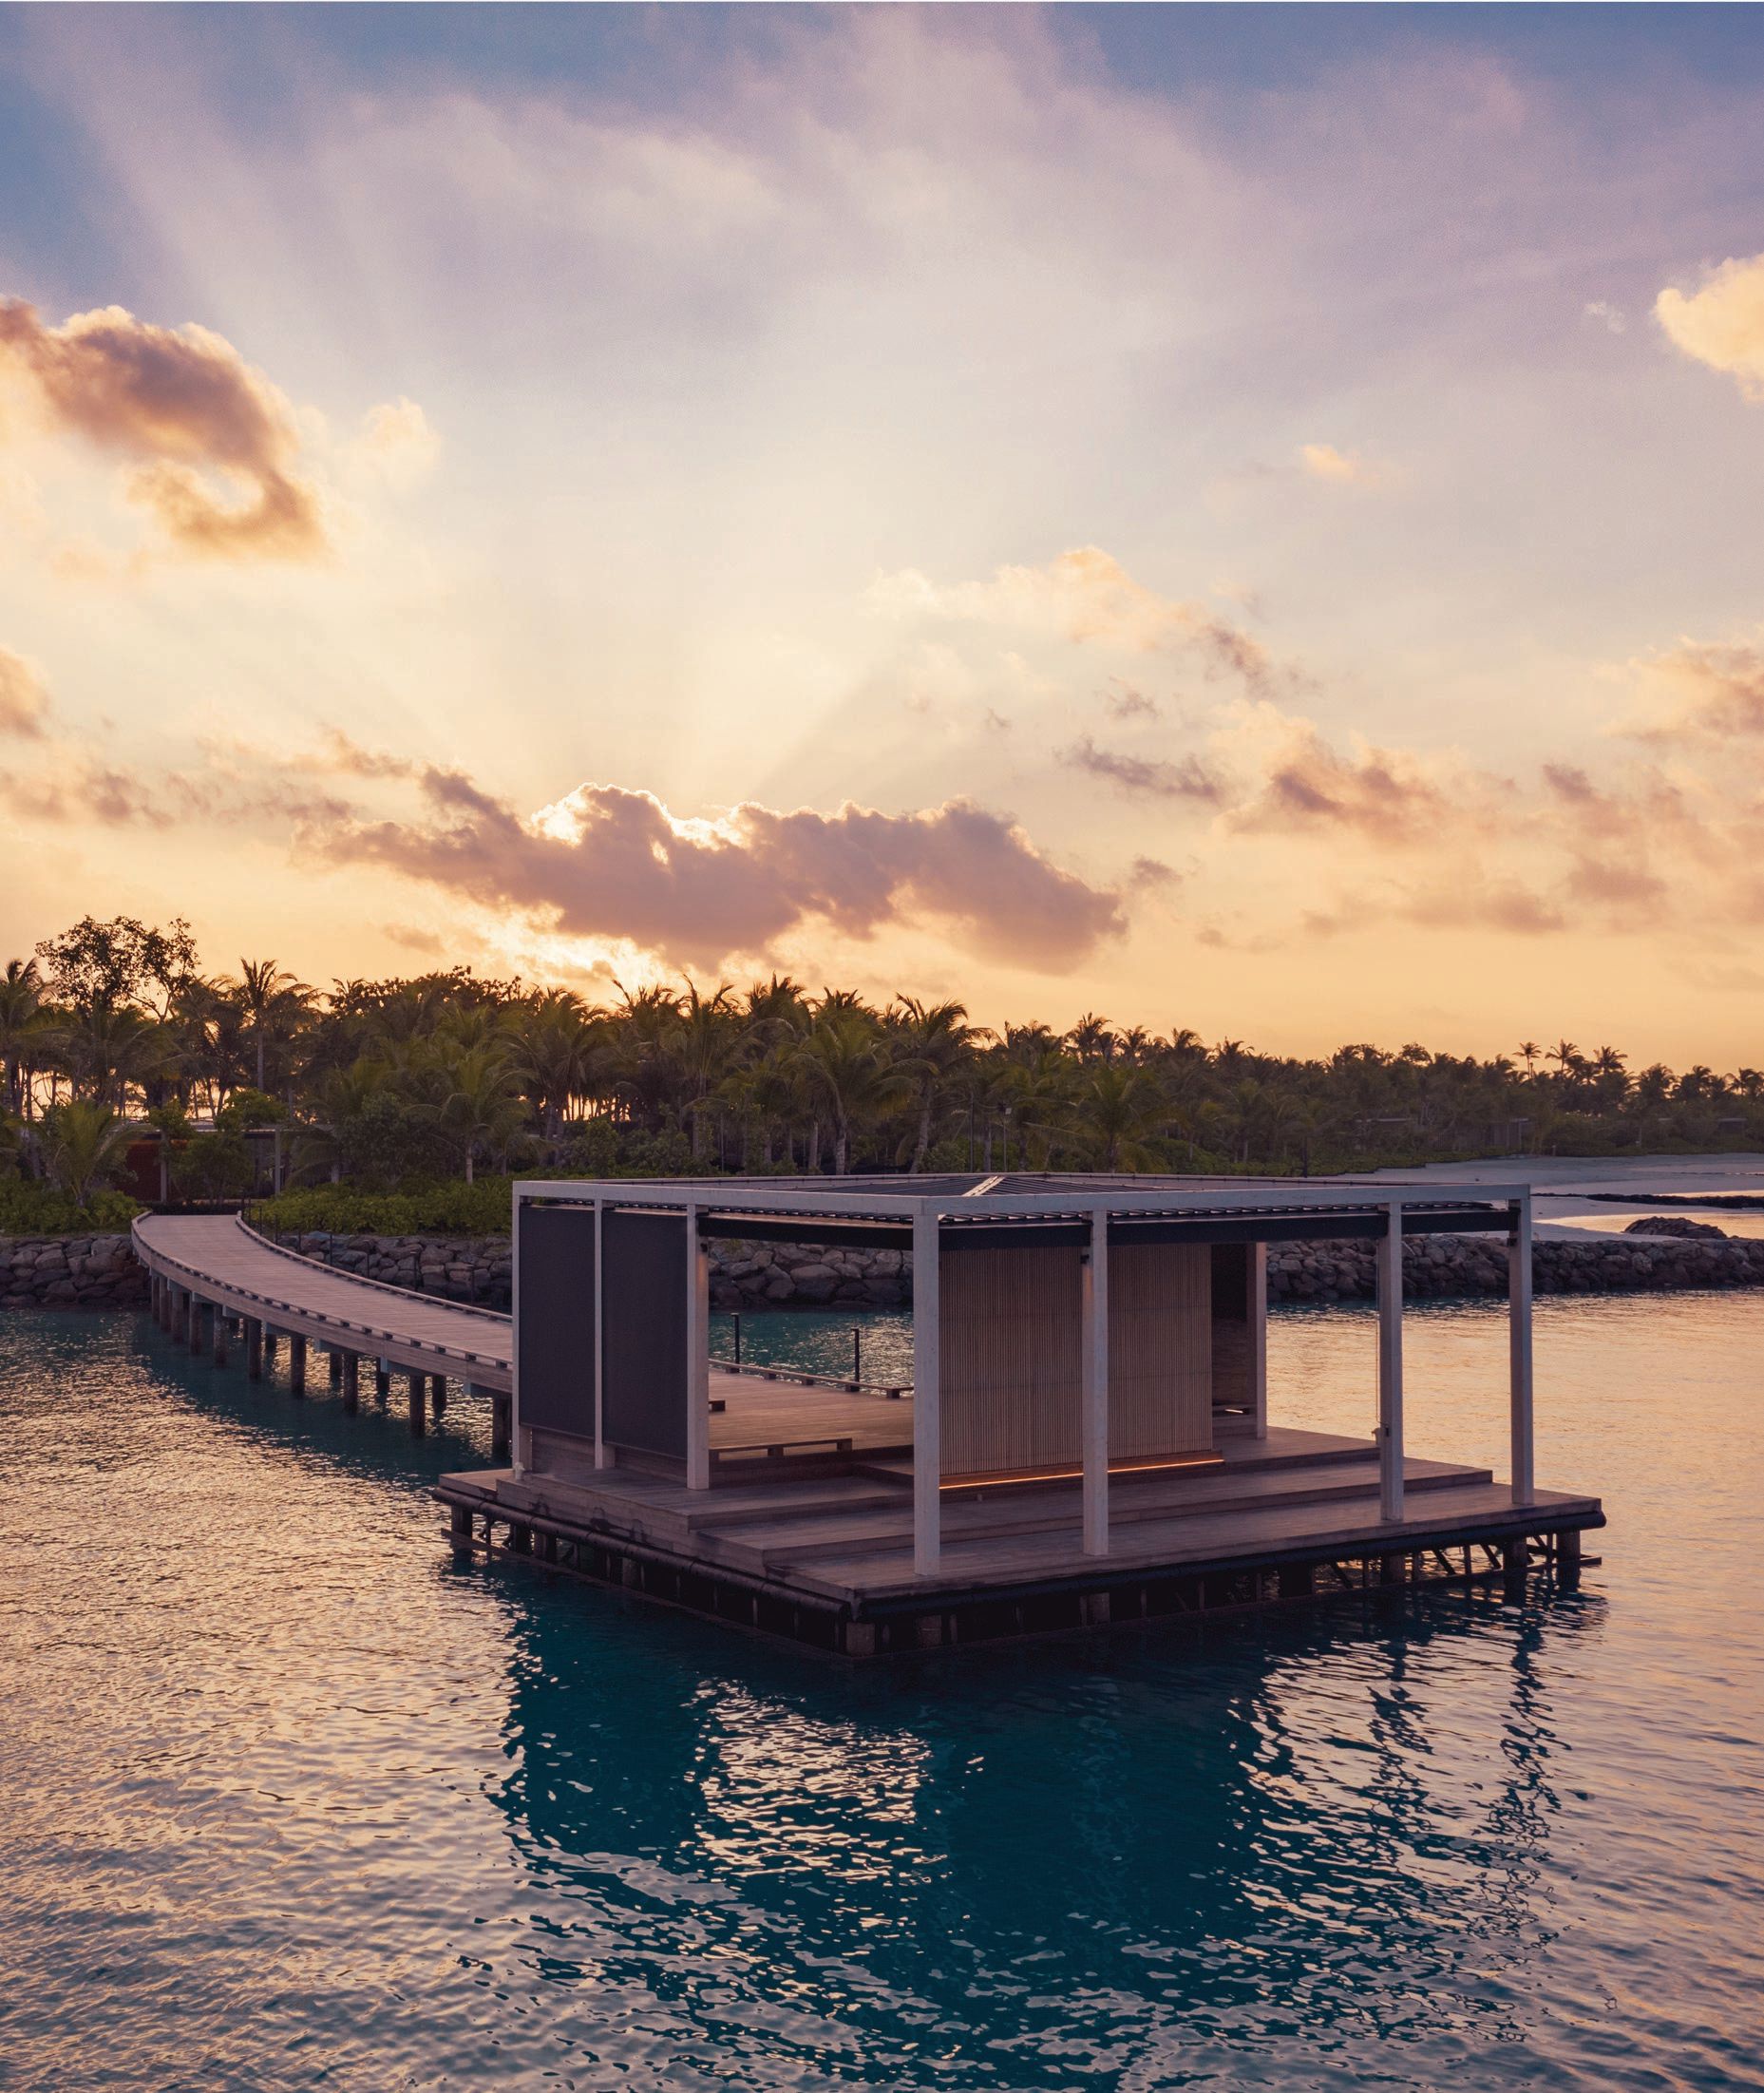 From the resort’s arrival pontoon, guests glimpse the tropical paradise that awaits. PHOTO COURTESY OF THE RITZ-CARLTON MALDIVES, FARI ISLANDS